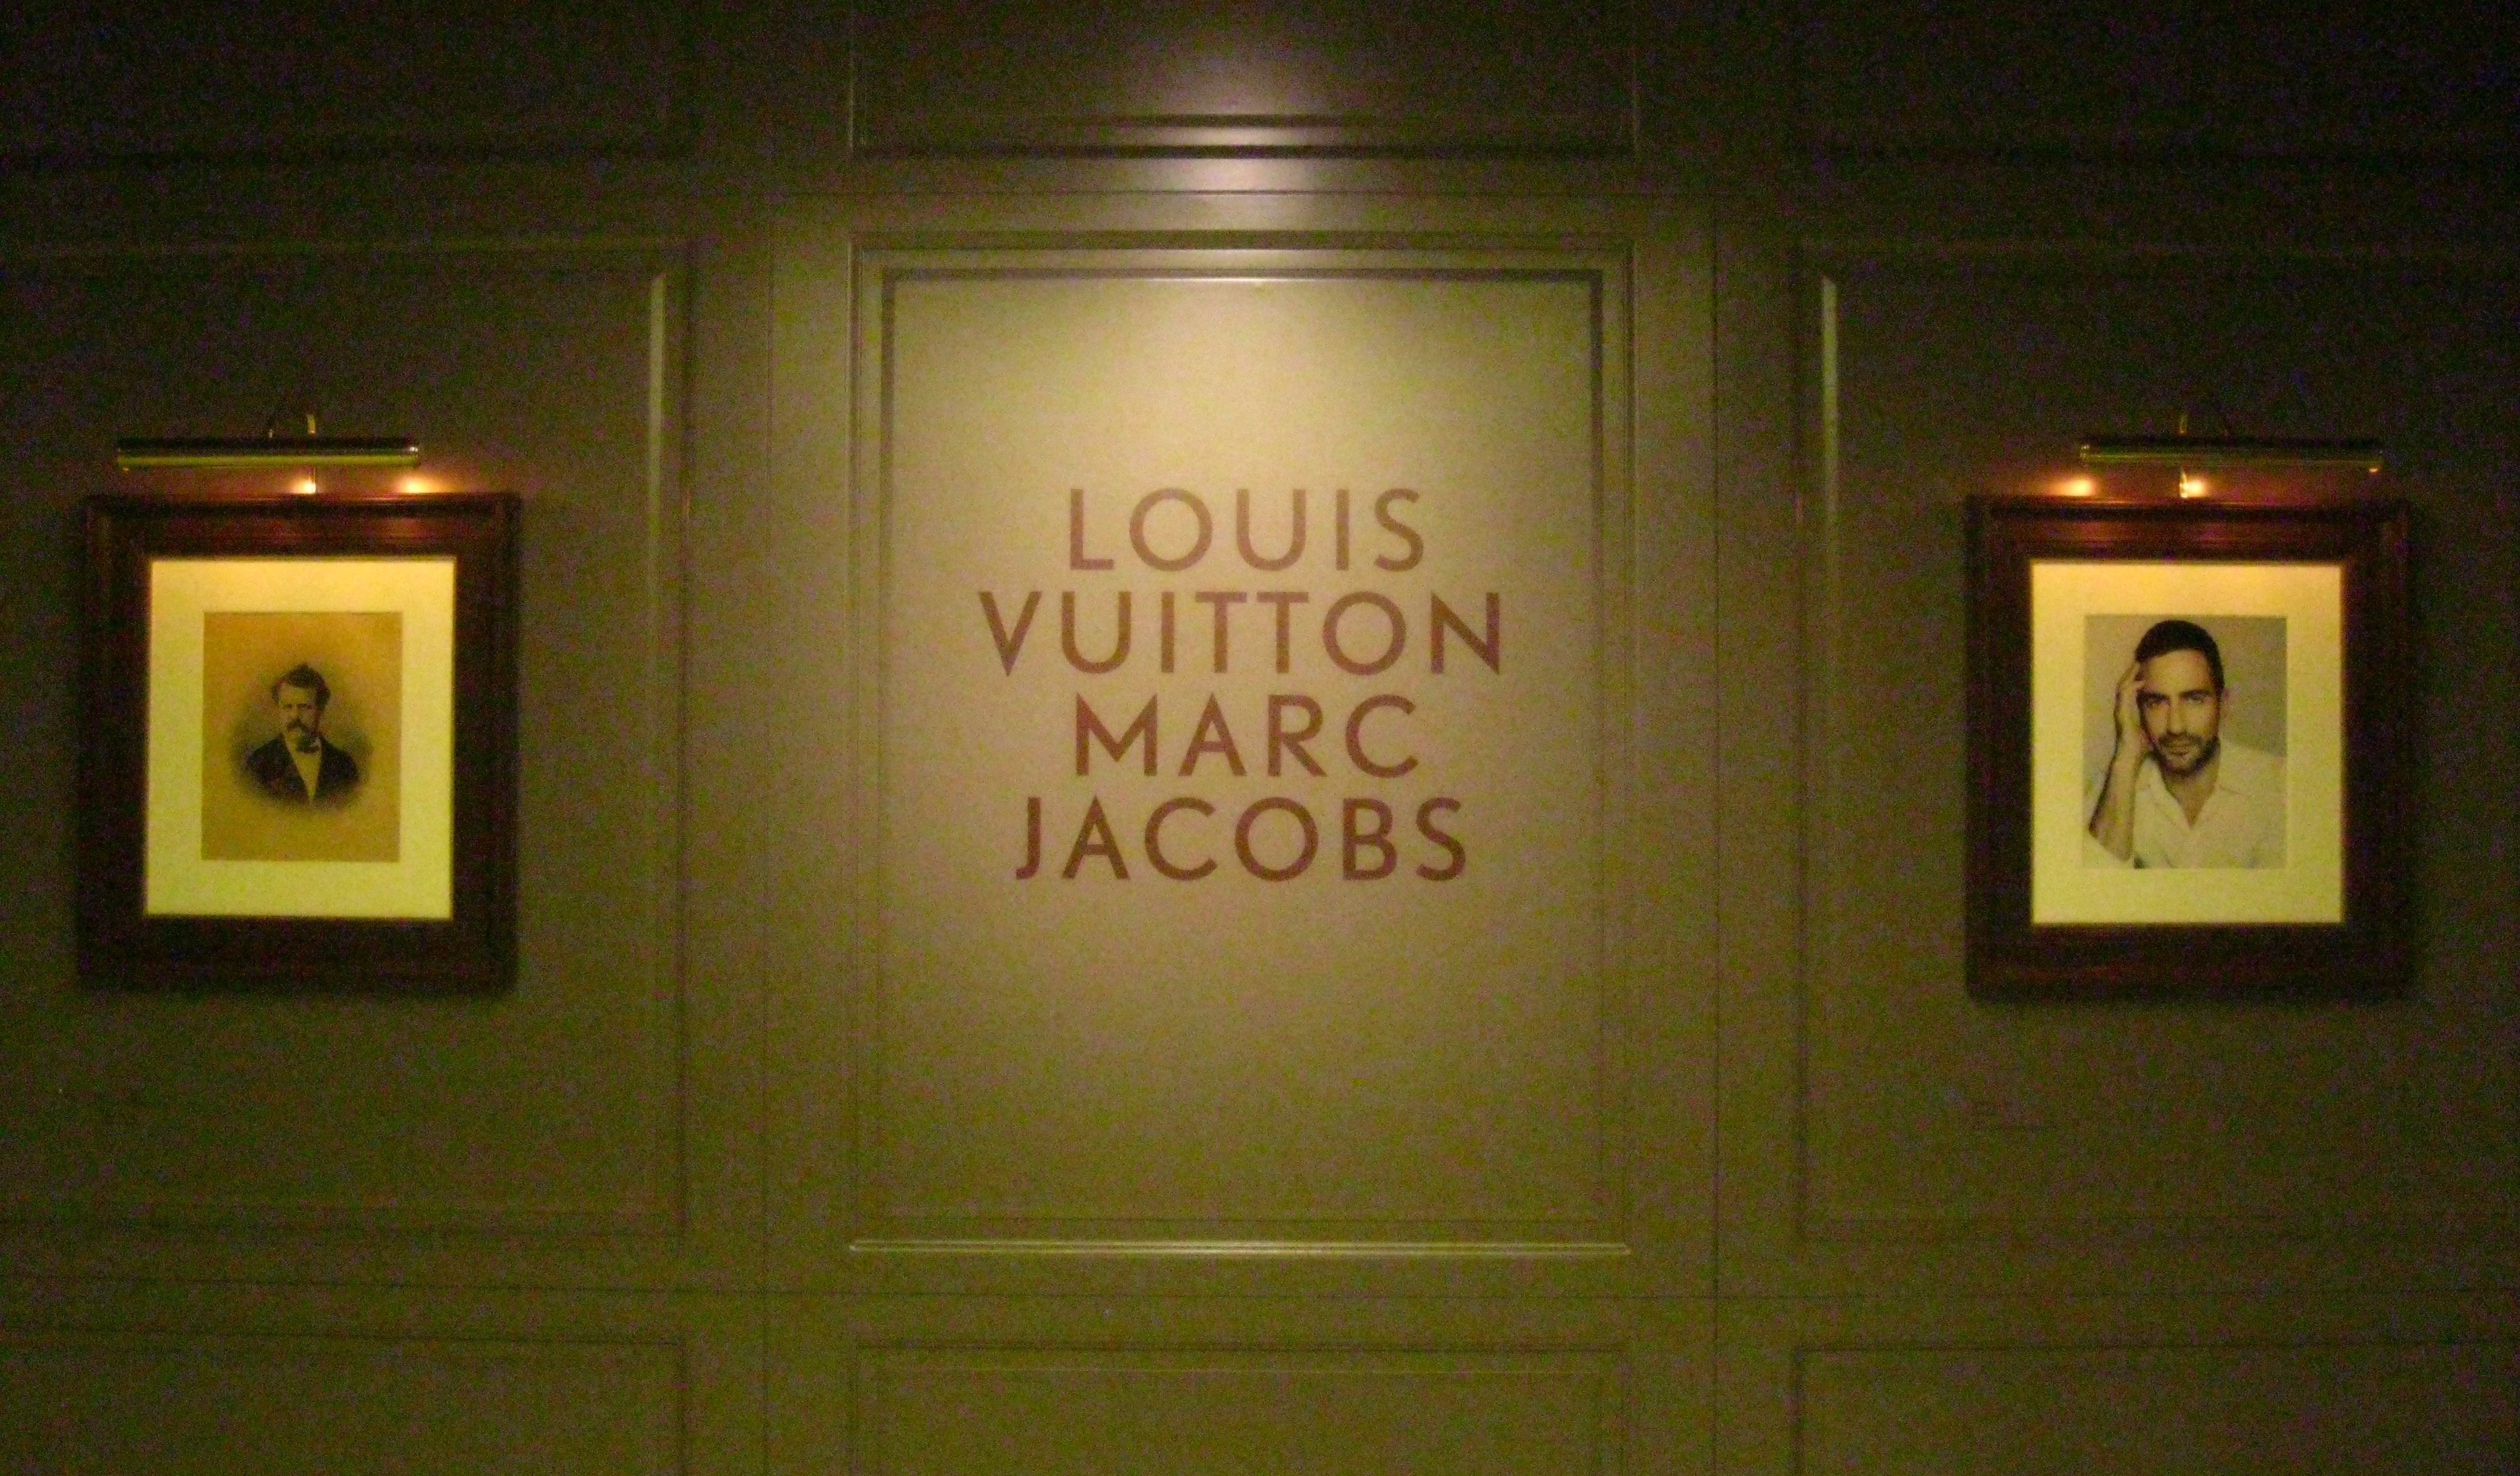 First Look at Sofia Coppola in Marc Jacobs' Final Louis Vuitton Ad Campaign